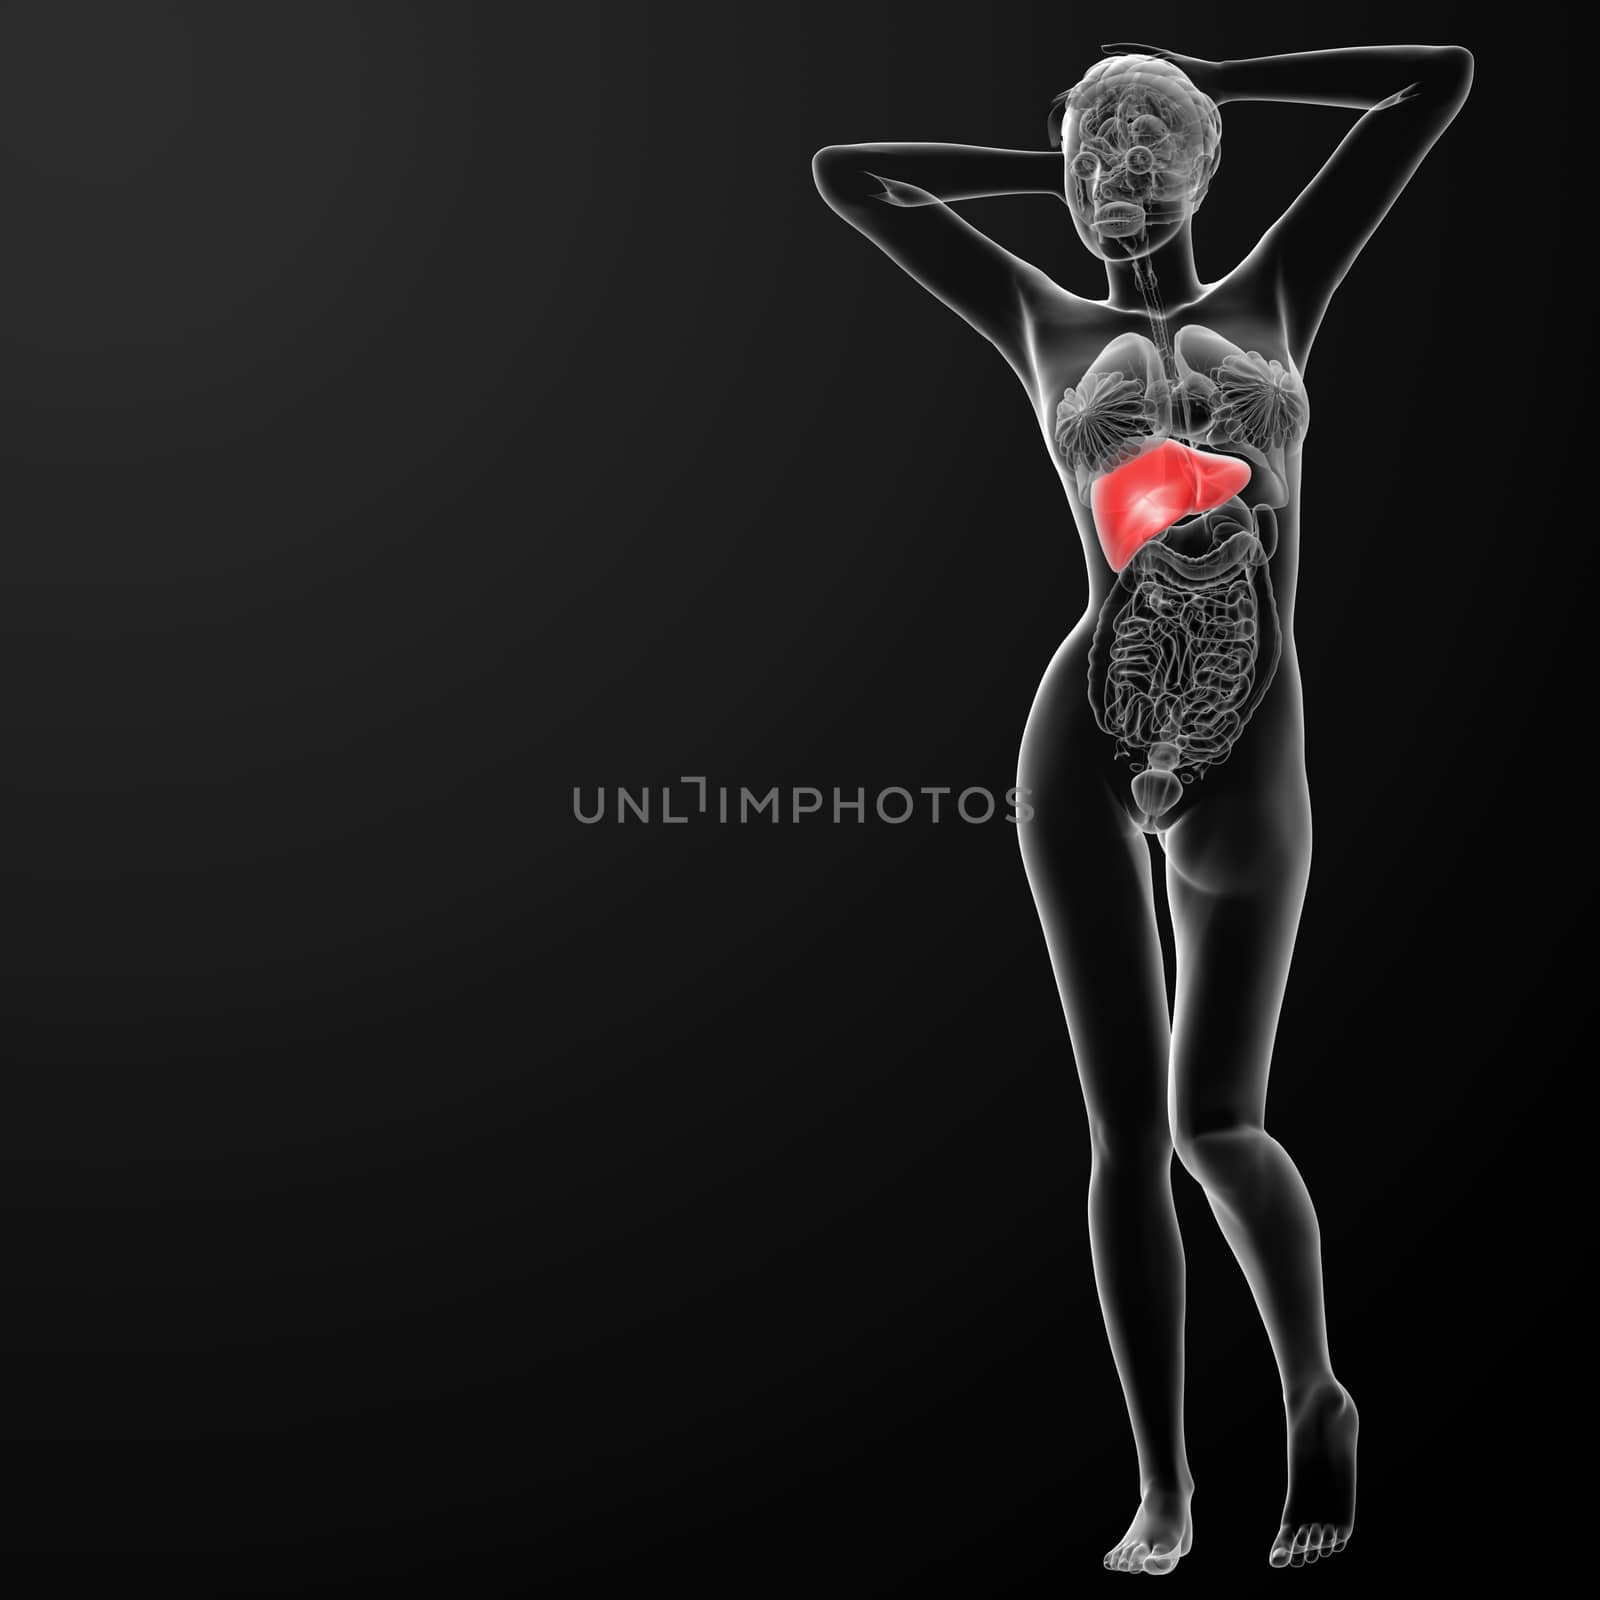 3d rendered illustration of the female liver - front view